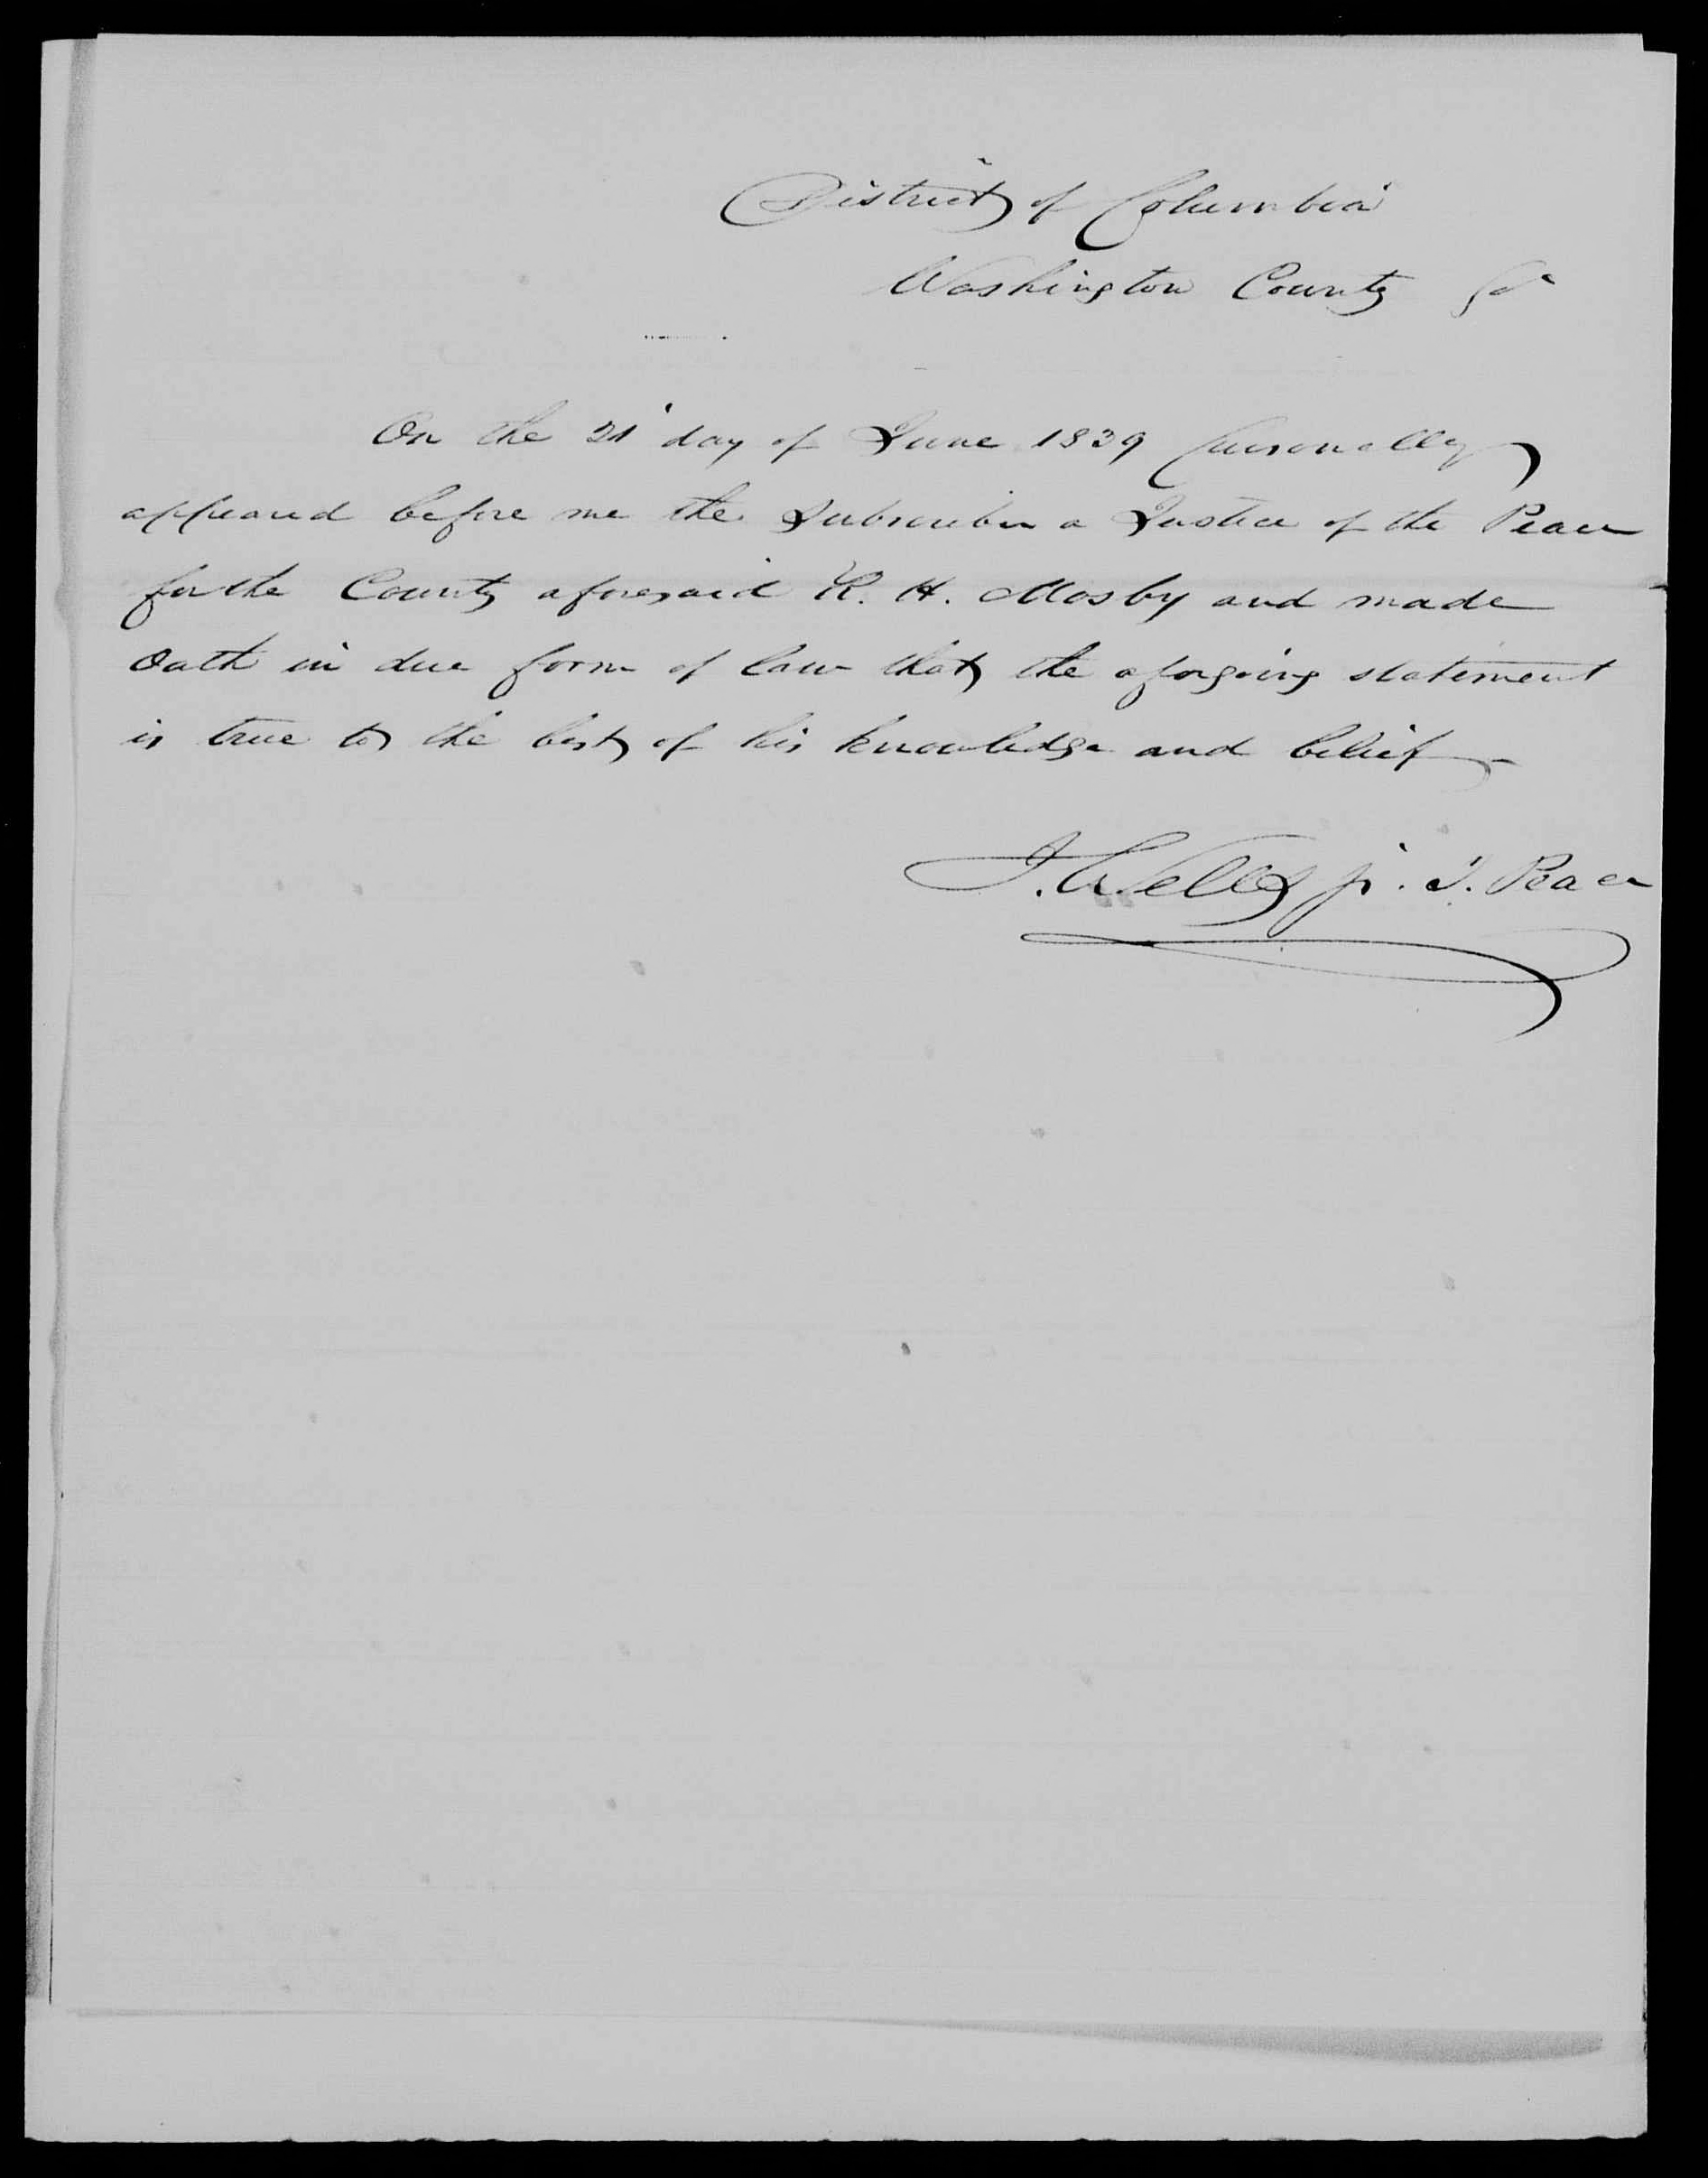 Affidavit of R. H. Mosby in support of a Pension Claim for Lucy Brown, 21 June 1839, page 2